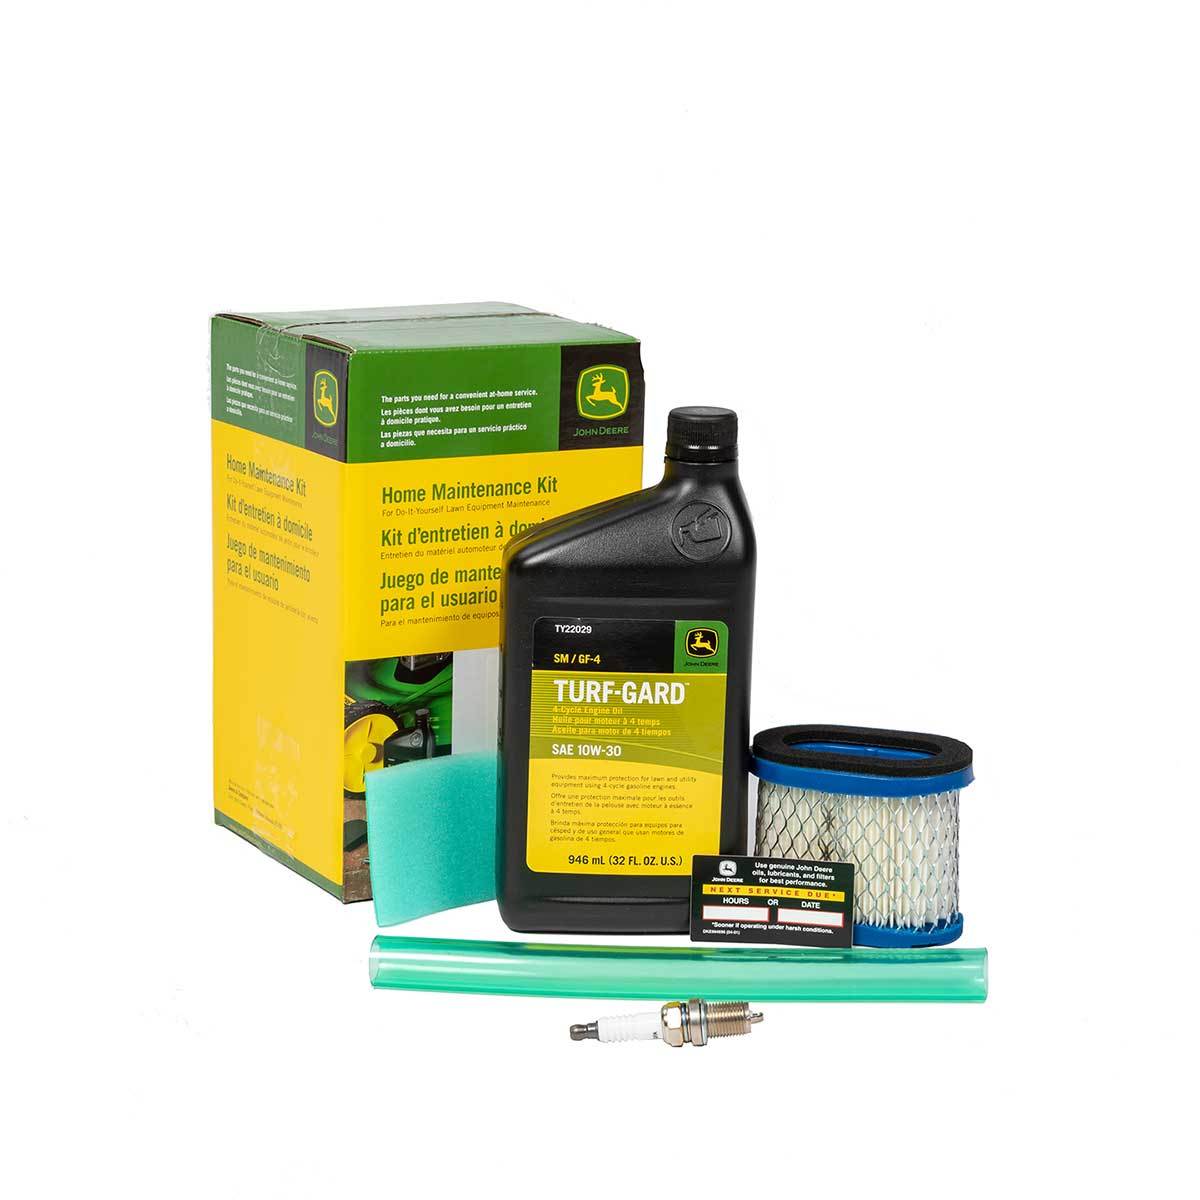 Home Maintenance Kit For JS, JA, and SP Series